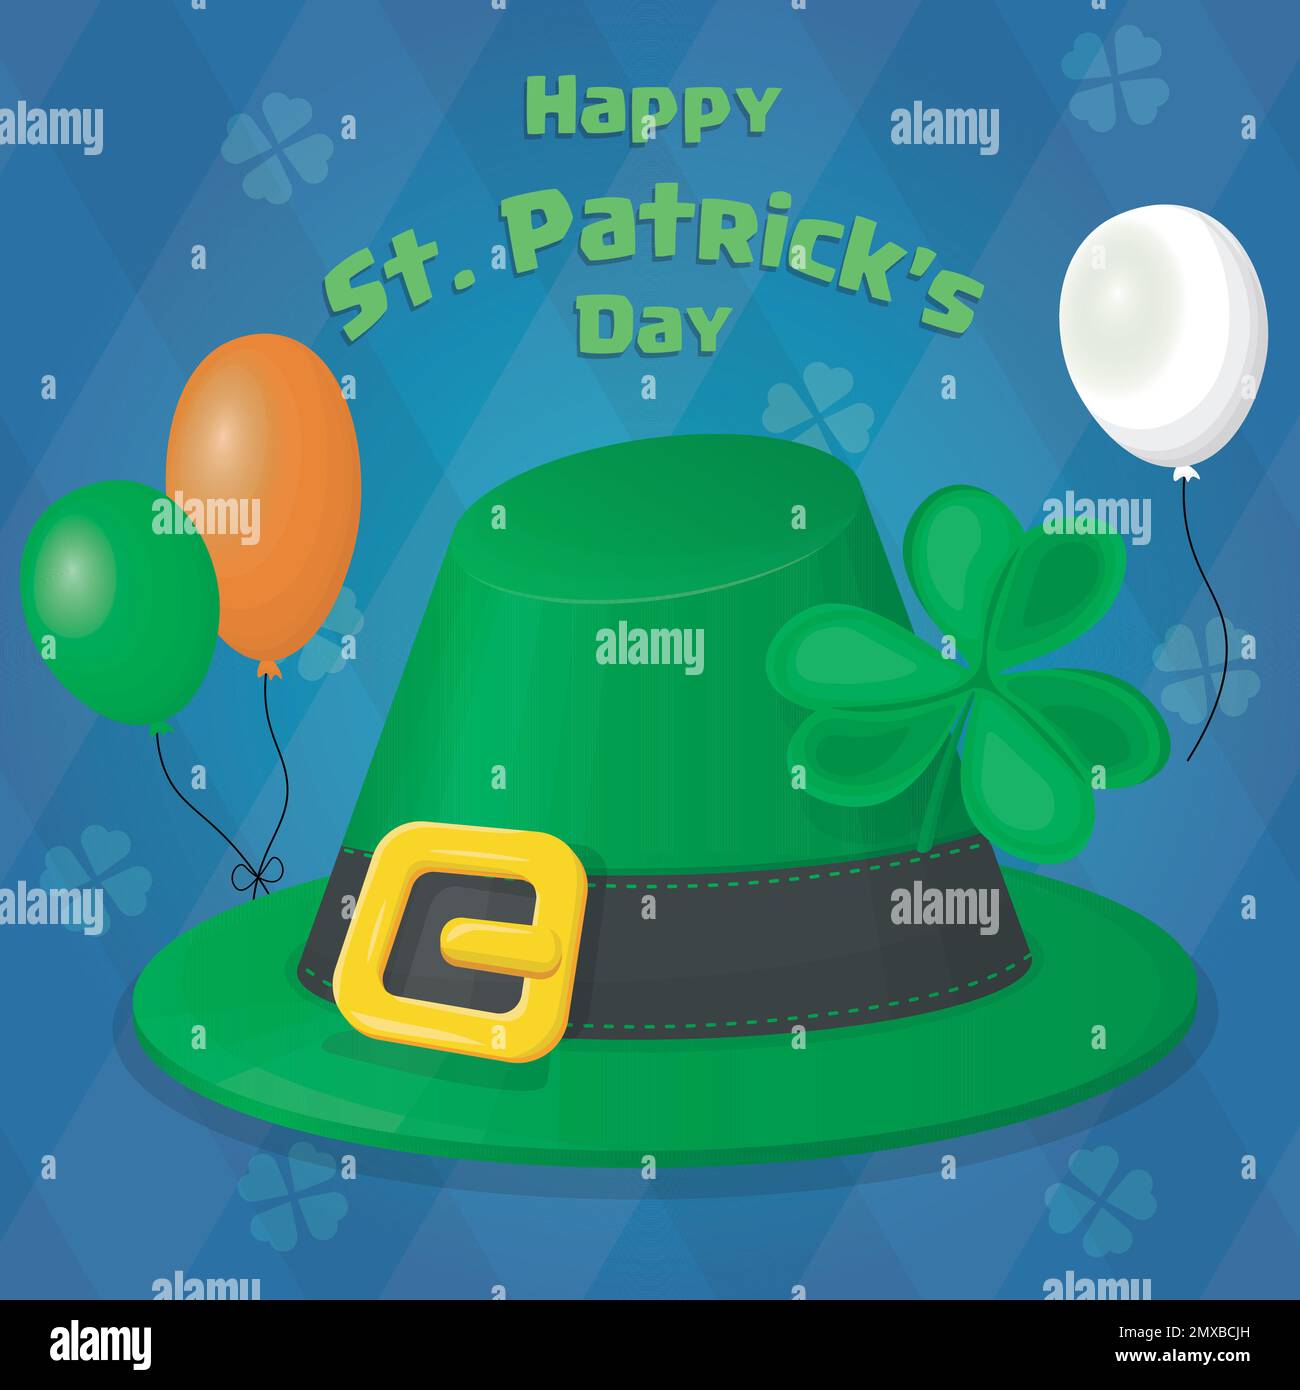 saint patricks day banner with green hat, abstract background and holiday balloons Stock Vector